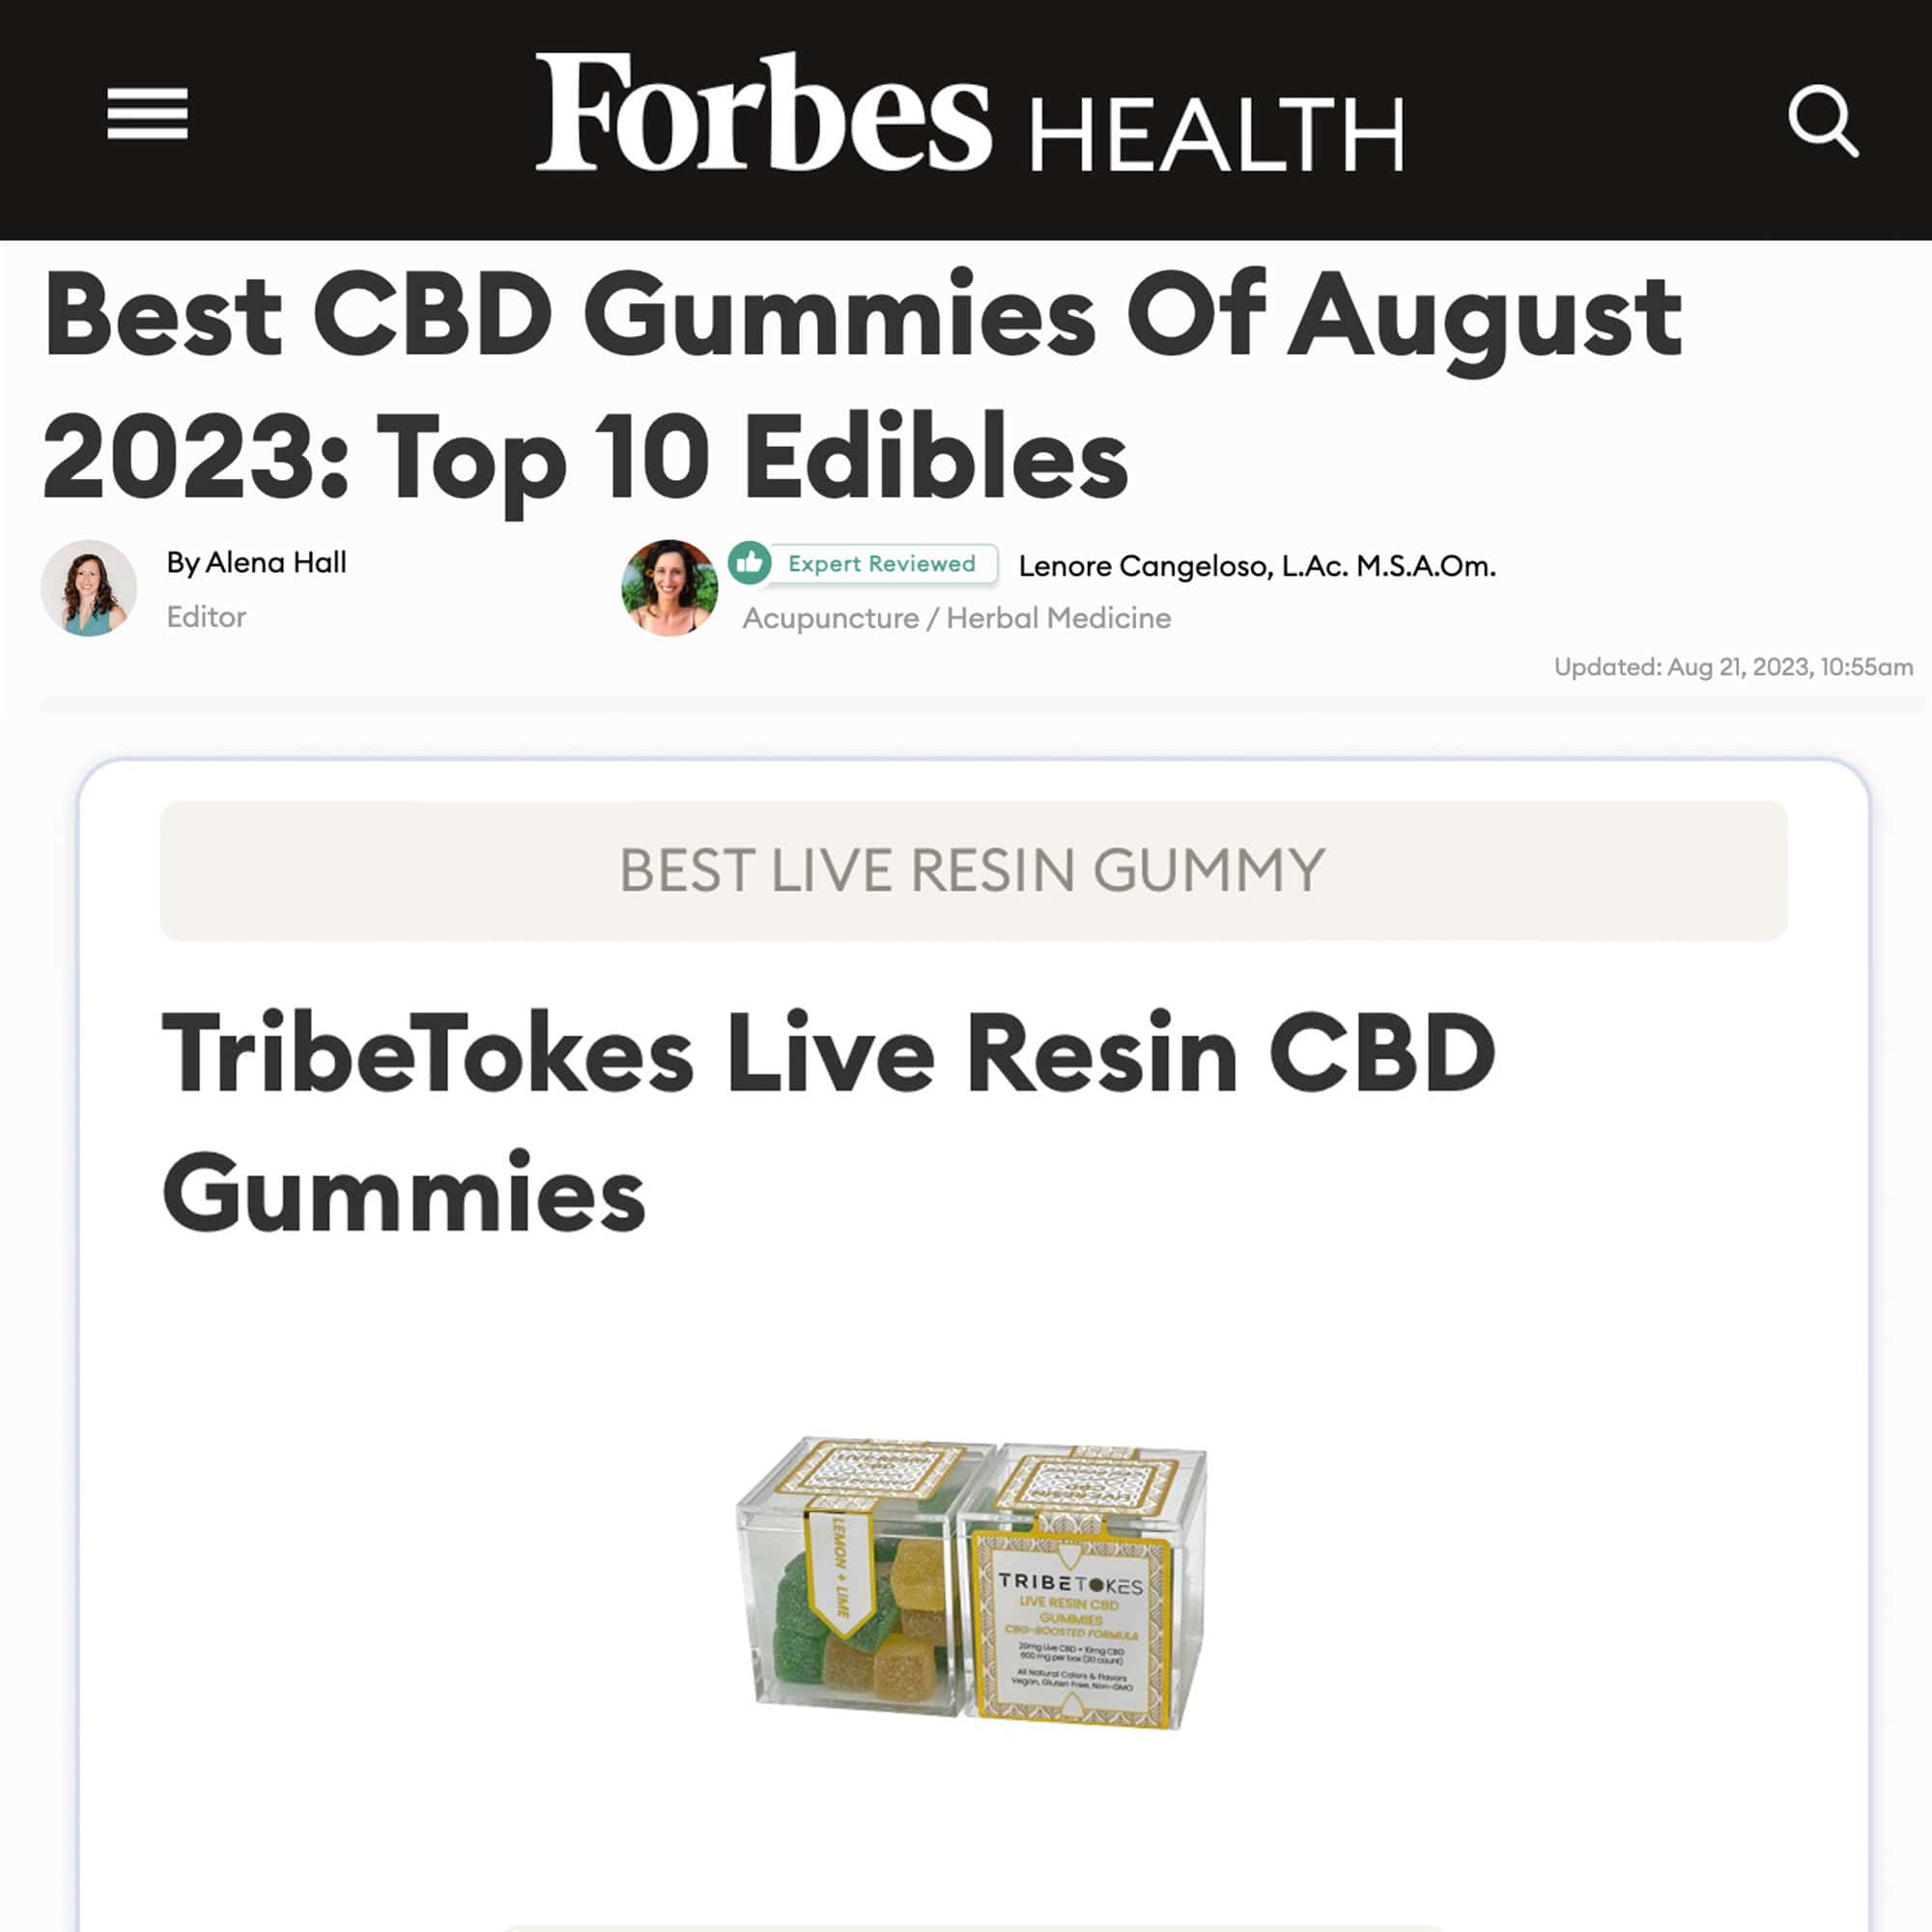 Forbes Best Live Resin Gummies